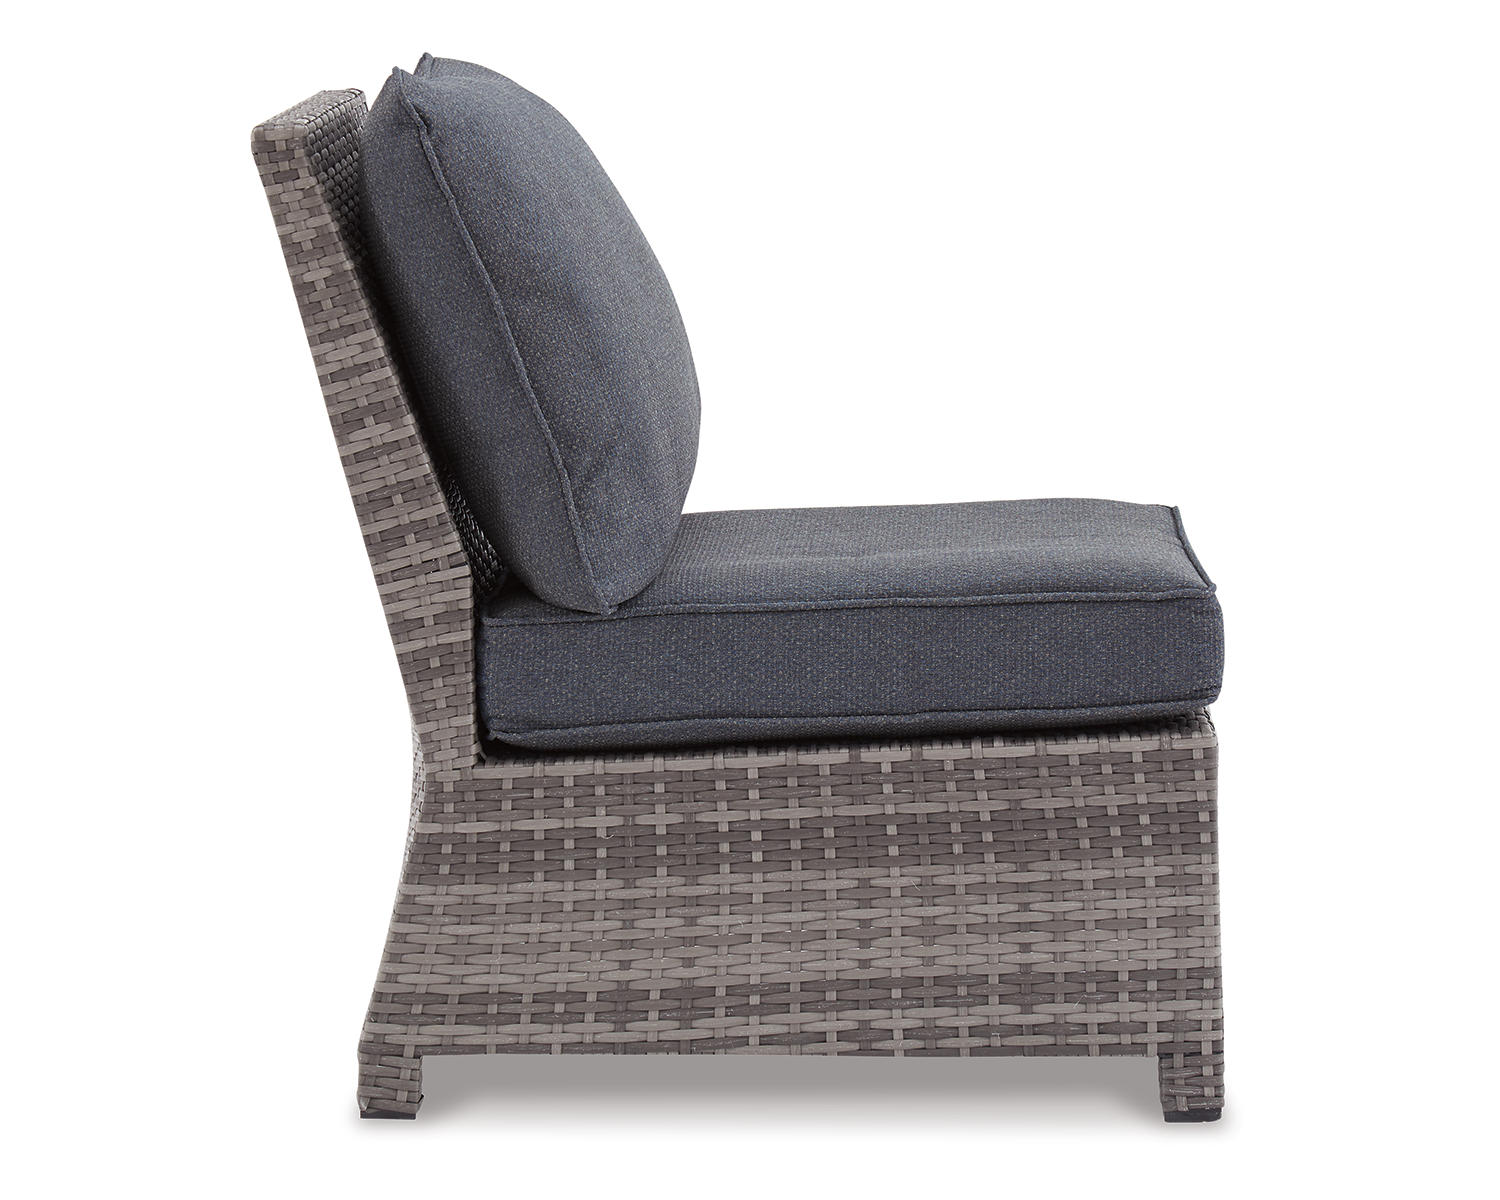 Signature Design by Ashley Salem Beach Outdoor Resin Wicker Armless Chair, Gray - image 5 of 6